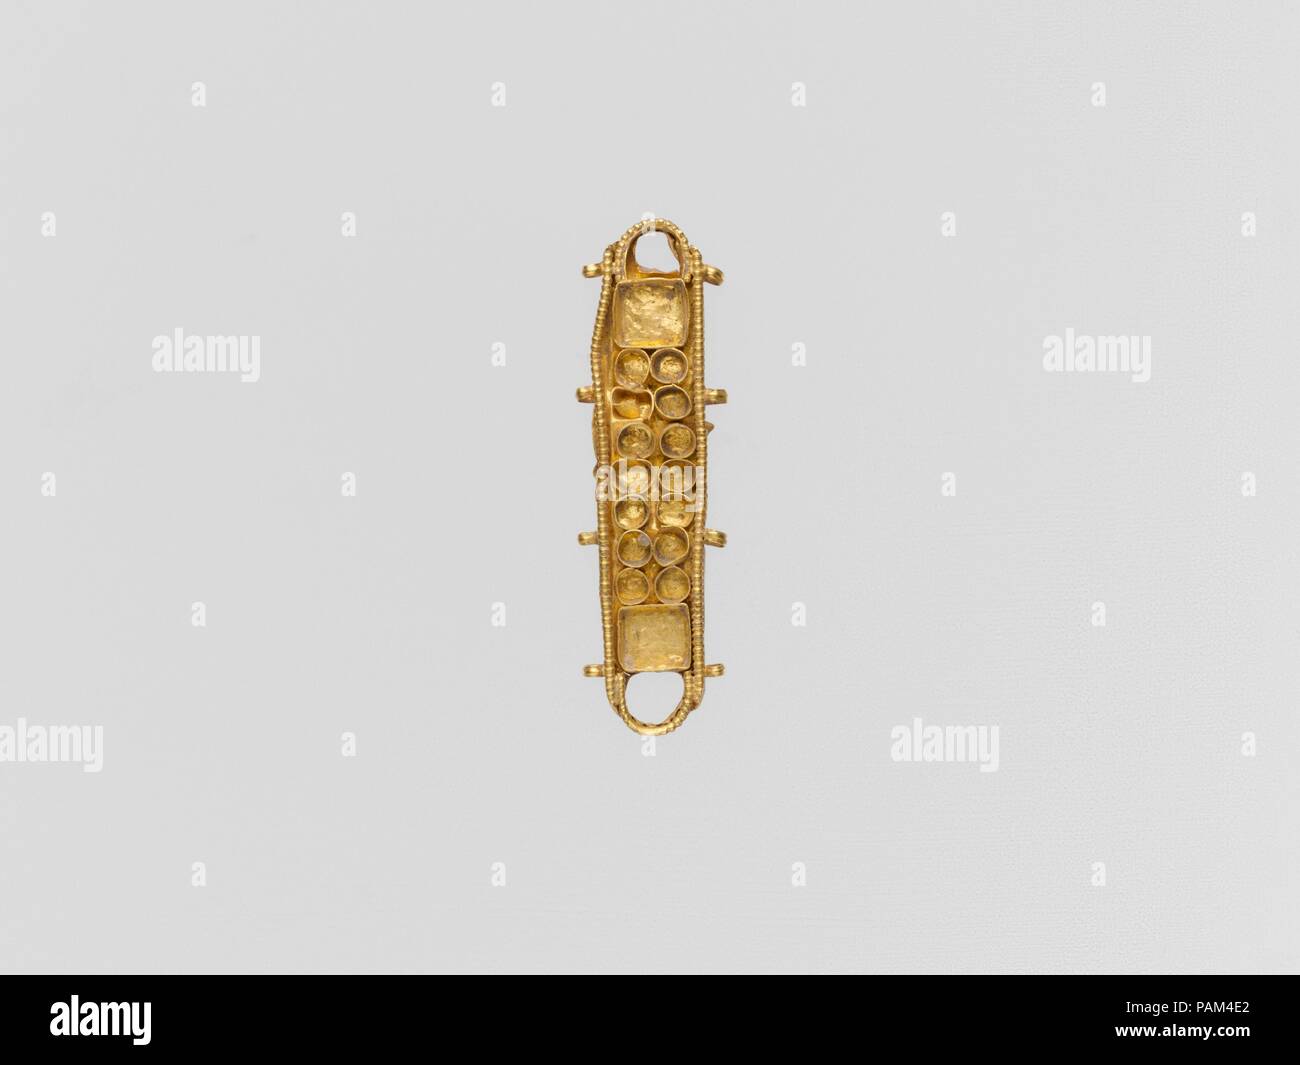 Gold ornament with cloisons. Culture: Roman. Dimensions: Other: 1 11/16 in. (4.3 cm). Date: 3rd-4th century A.D. or later.  Oblong bead ornament. Museum: Metropolitan Museum of Art, New York, USA. Stock Photo